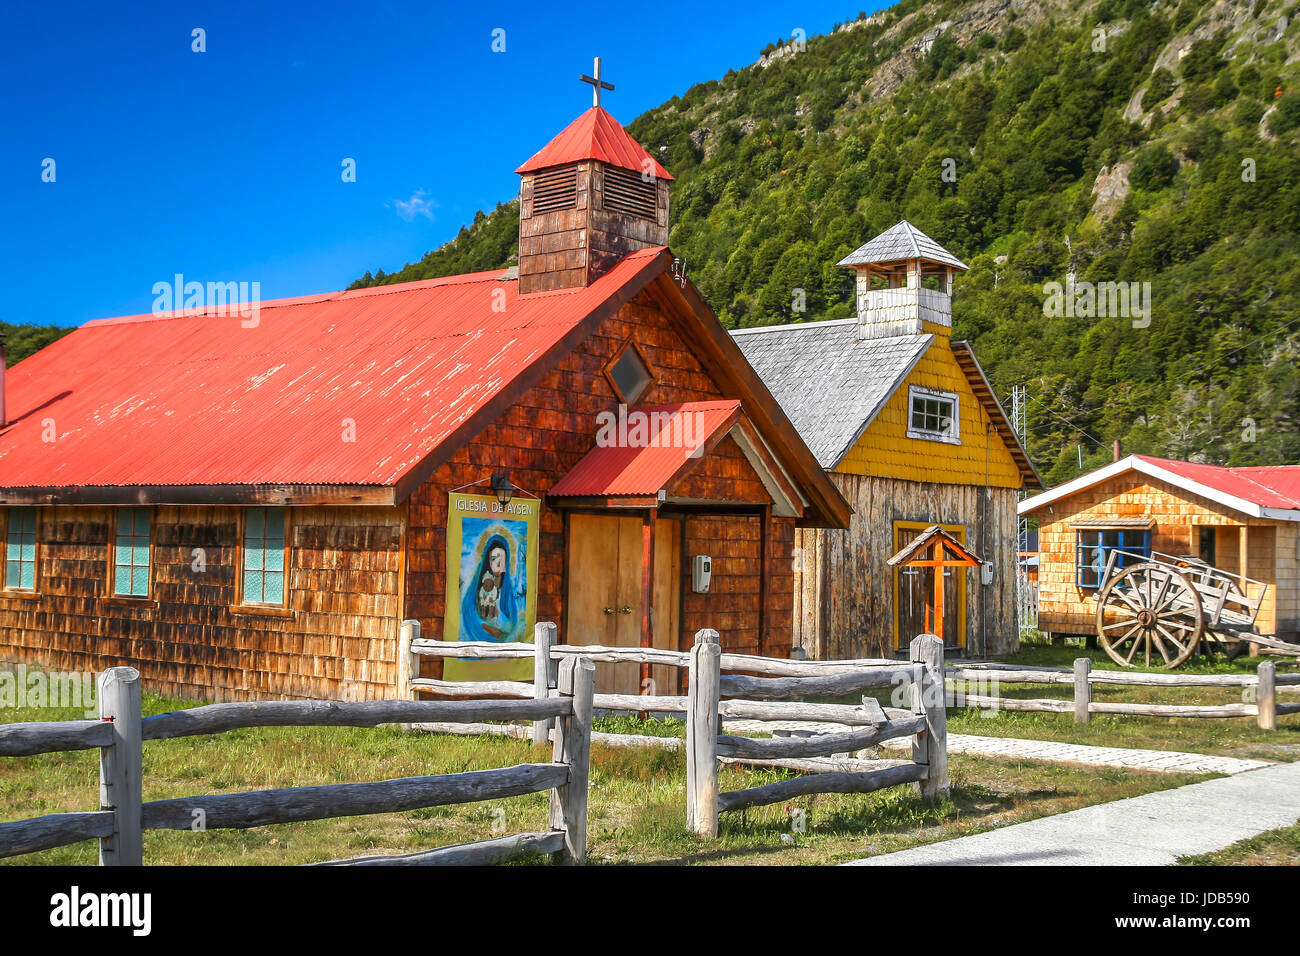 Old small wooden church in Villa O Higgins, small Chilean town at the end of Carretera Austral in Patagonia, Chile Stock Photo